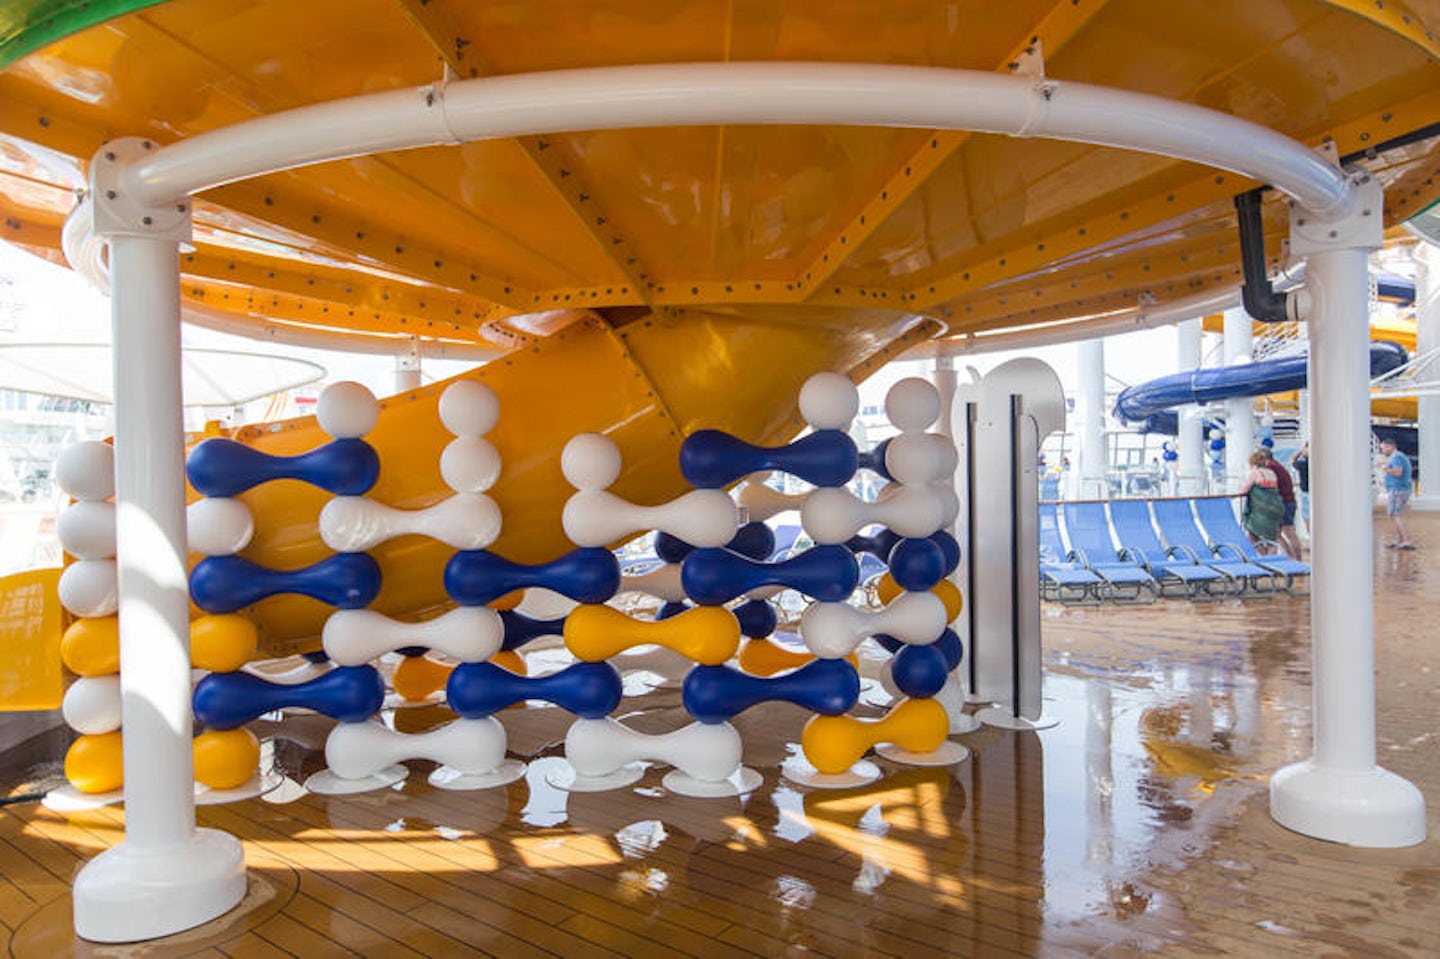 The Perfect Storm on Harmony of the Seas